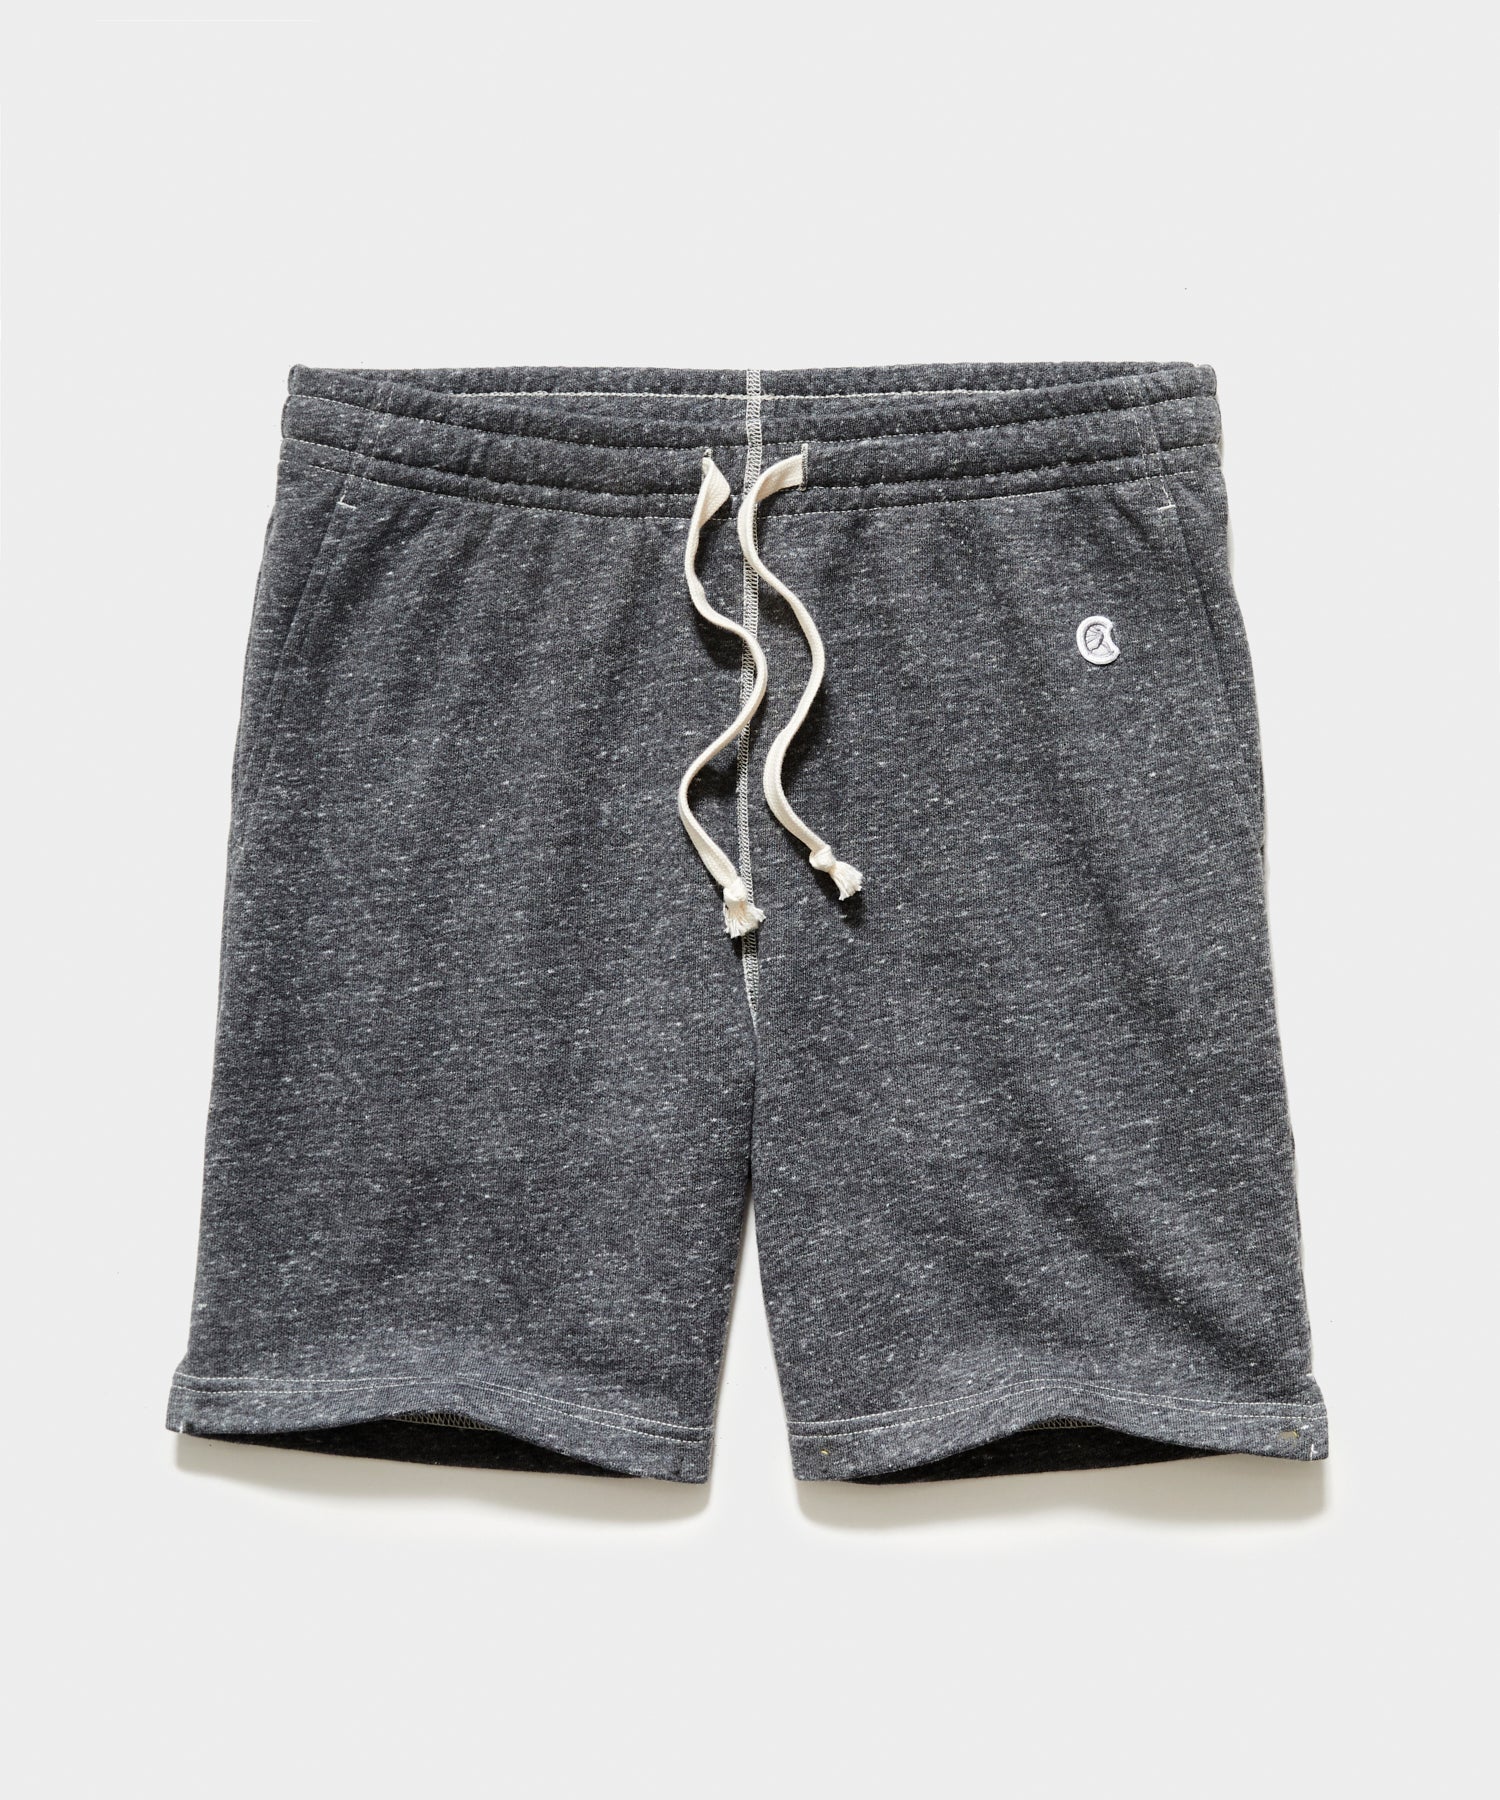 7" Midweight Warm Up Short in Charcoal Mix